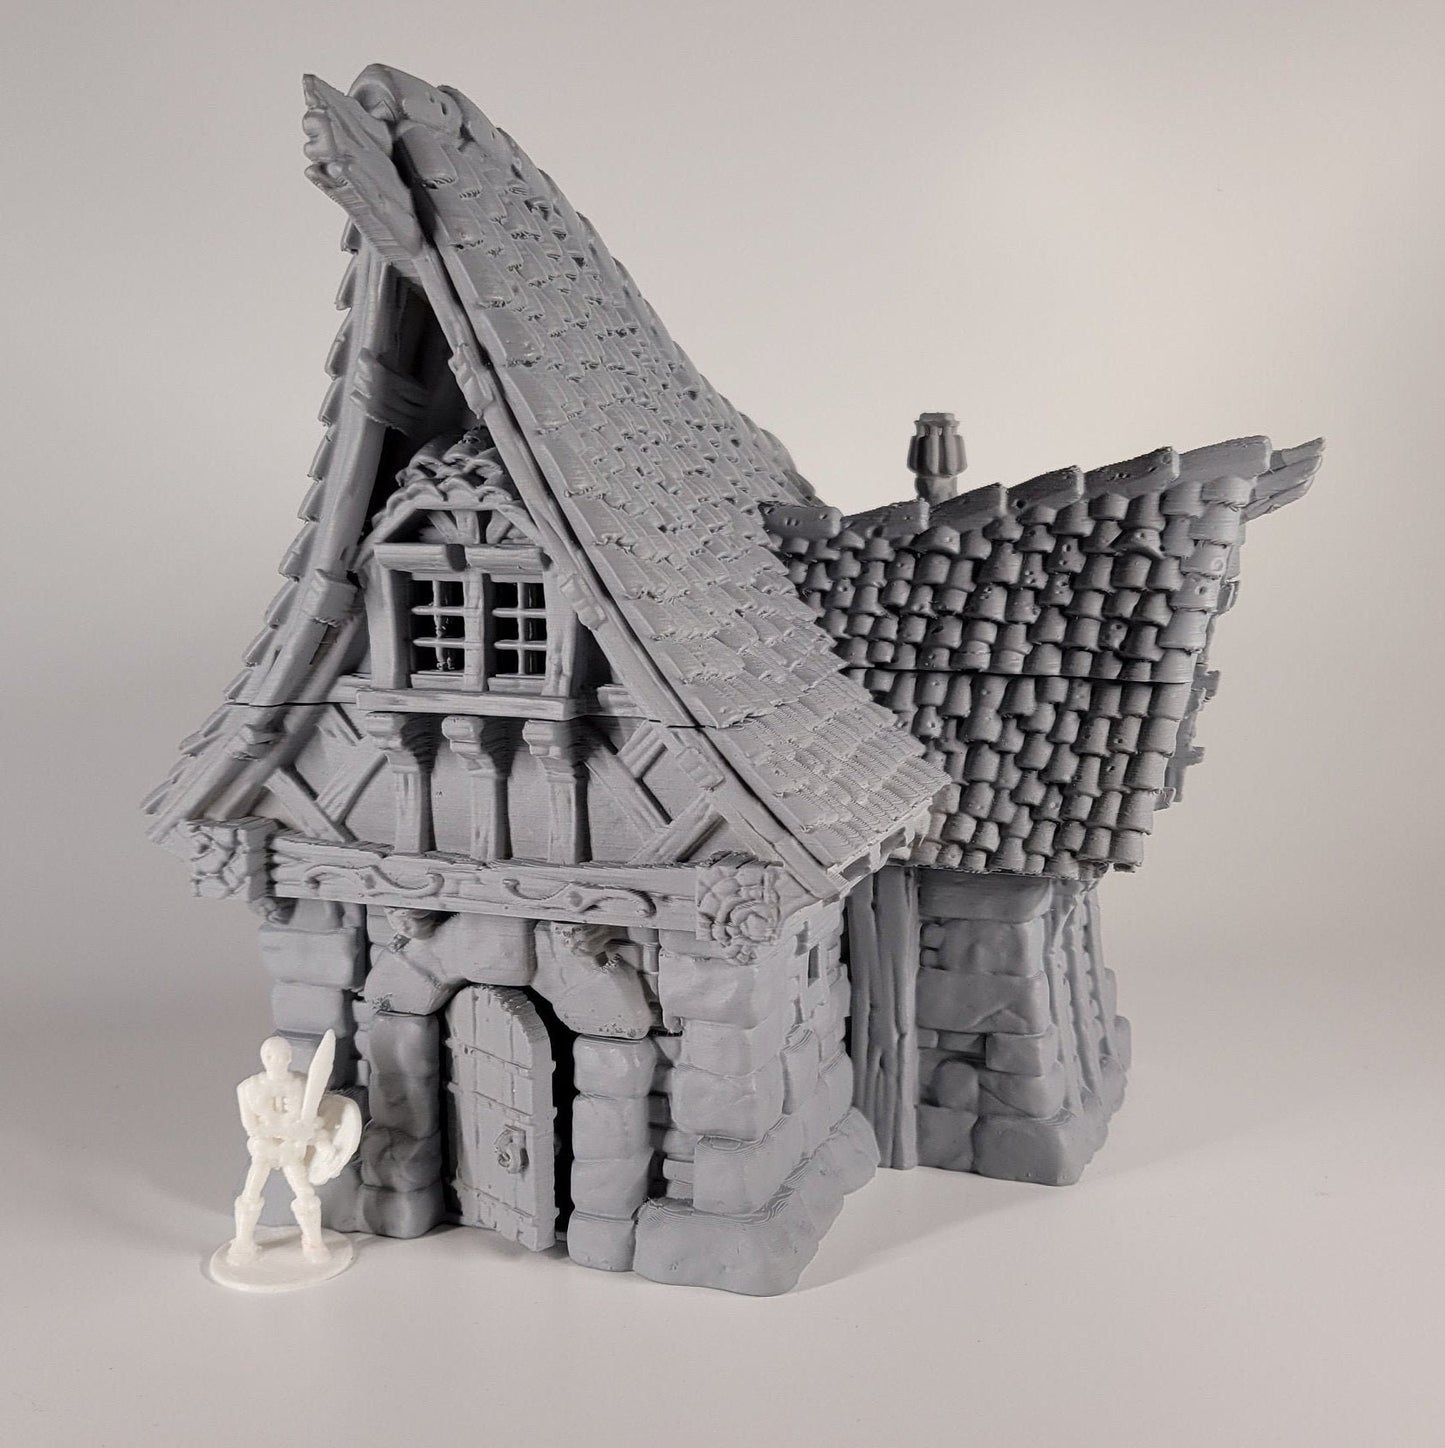 Small 2 Story House (DIY or Finished) - Playable D&D Terrain/Scenery (City of Firwood)